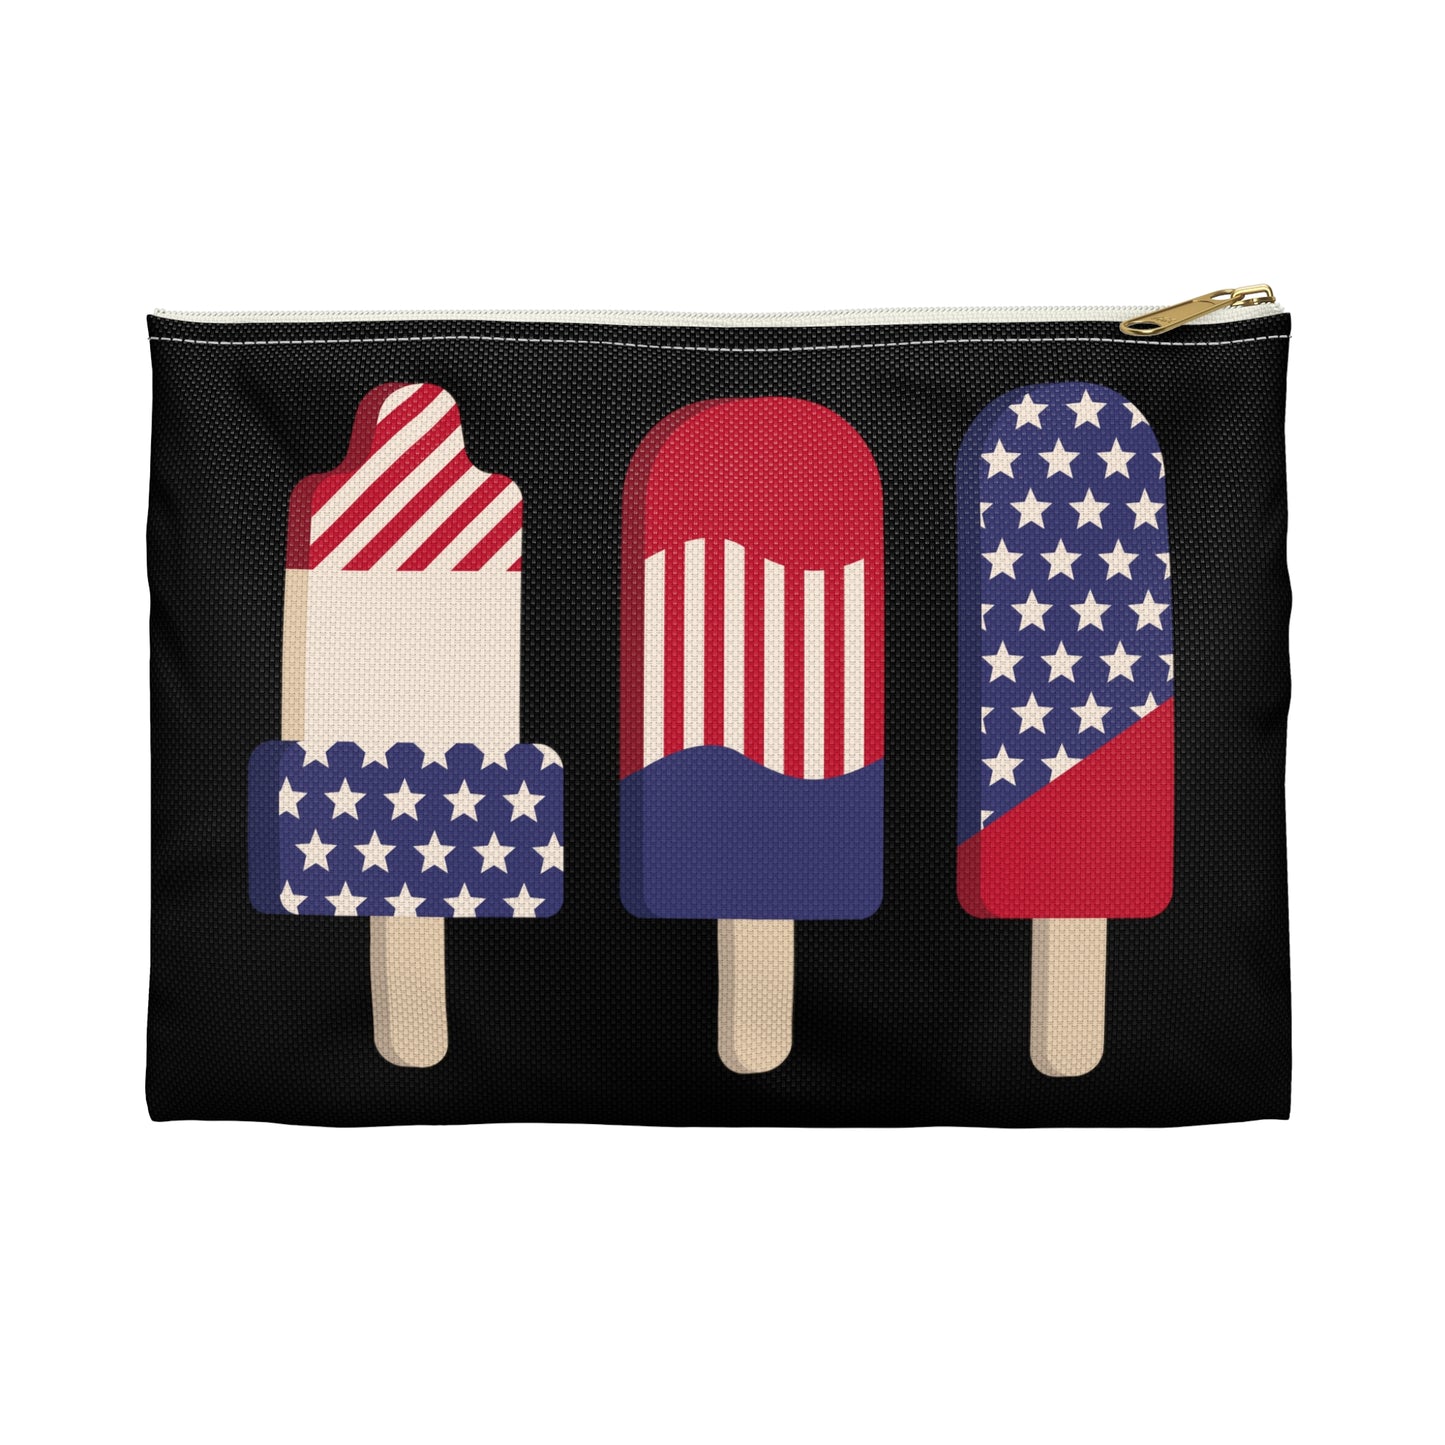 Patriotic American USA Popsicles Wrap-Around Graphics On Black Zipper Pouch Fourth of July Mother's Day Makeup Veterans